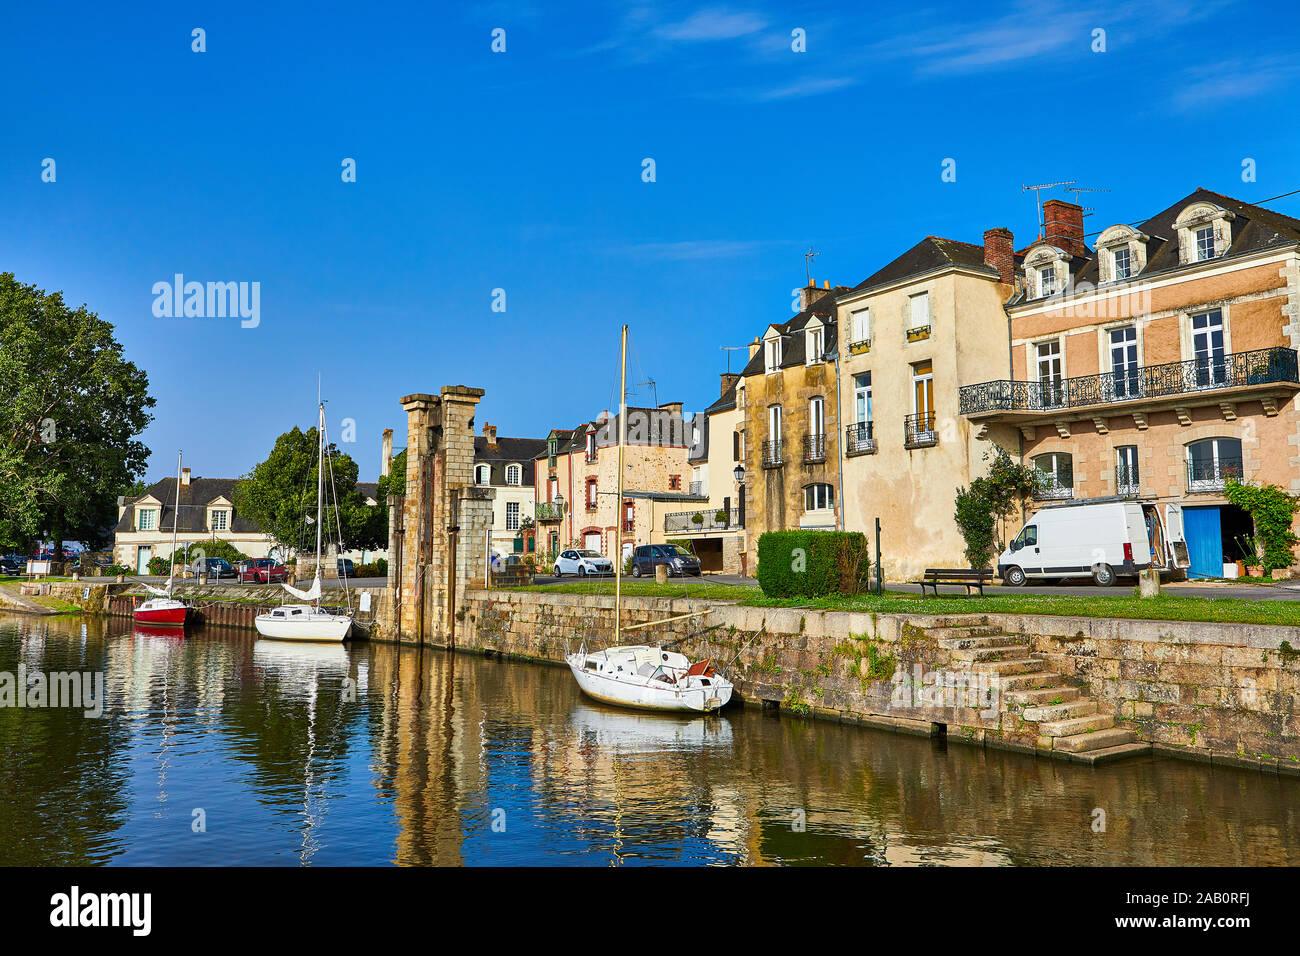 Image of Redon, Brittany, France, from the river Vilaine Stock Photo